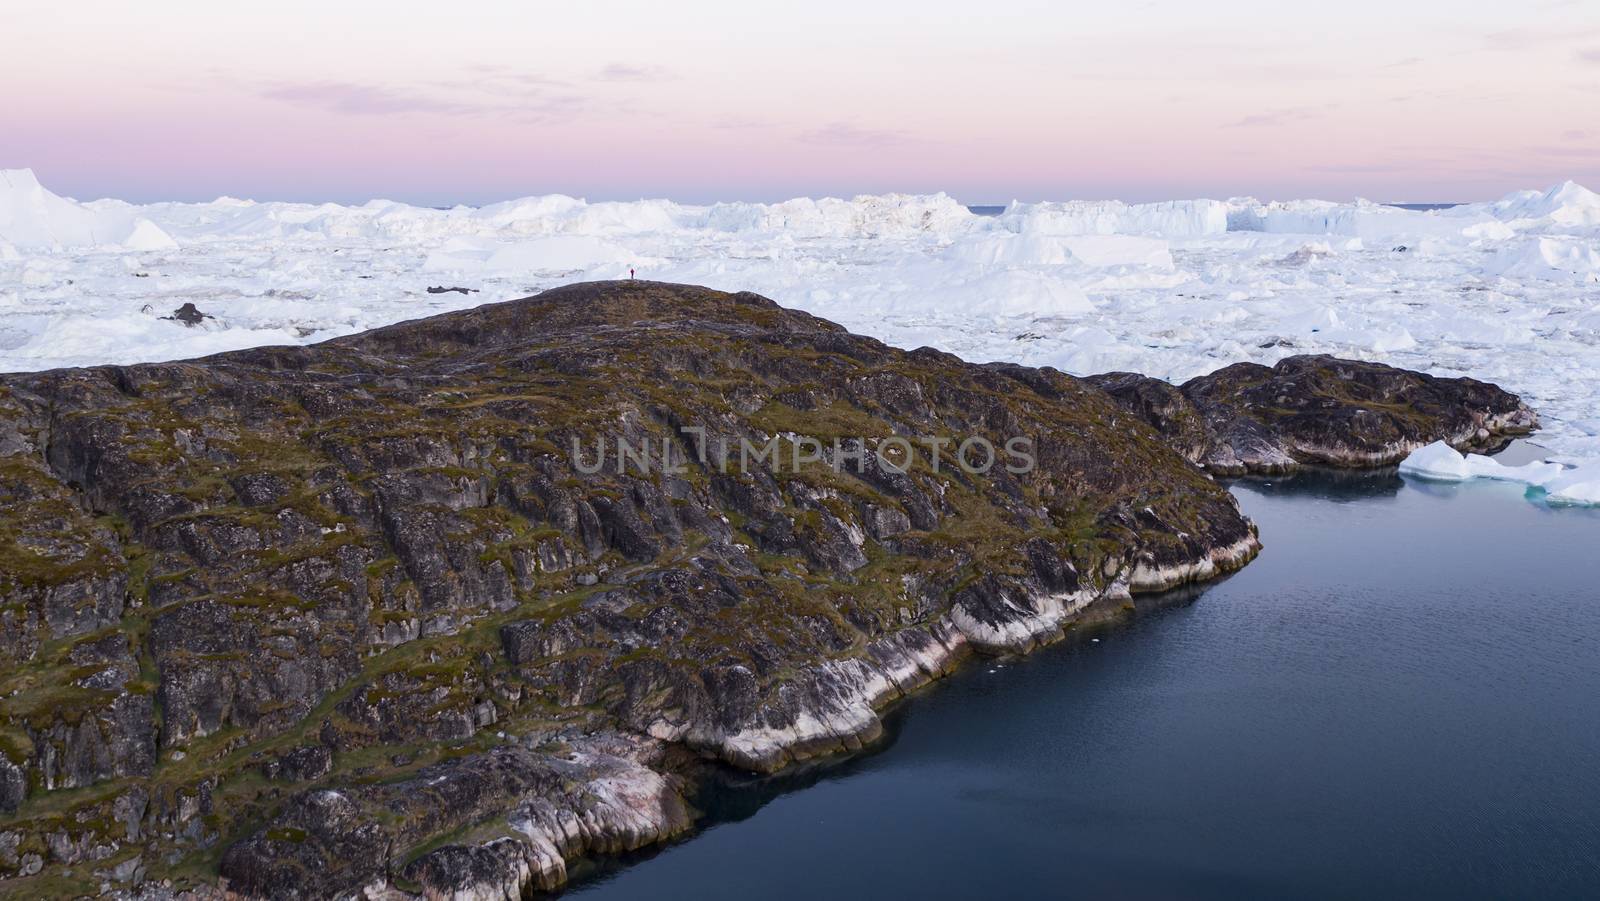 Arctic landscape nature with icebergs and ice in Greenland icefjord. Aerial drone image of ice and iceberg. Ilulissat Icefjord with icebergs from Jakobshavn Glacier aka Sermeq Kujalleq glacier.